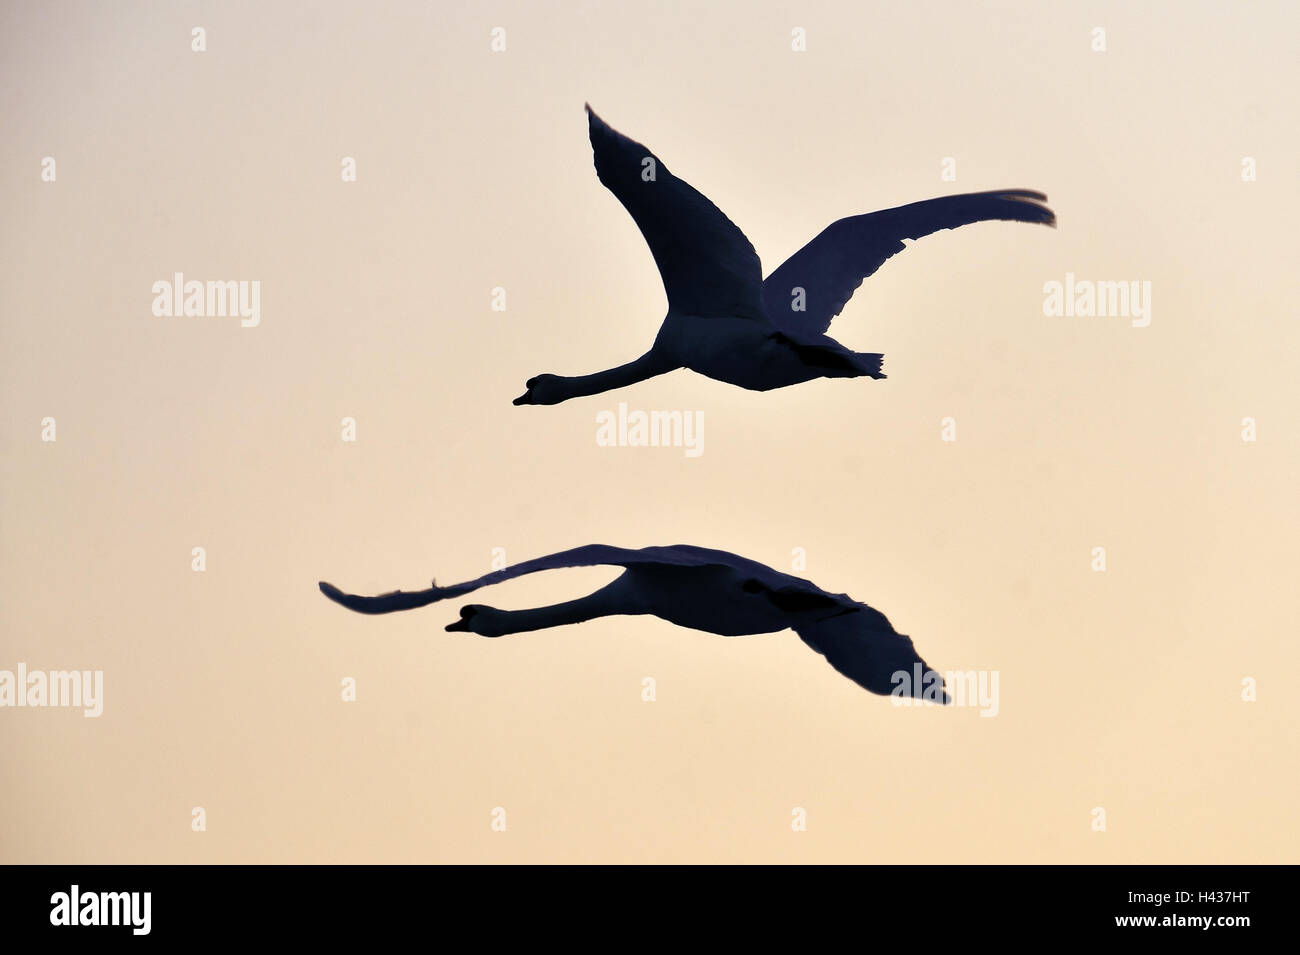 Hump swans, Cygnus olor, two, flight, silhouette, nature, animals, birds, swans, couples, evening light, fly, birds of passage, wings, stretched out, Stock Photo